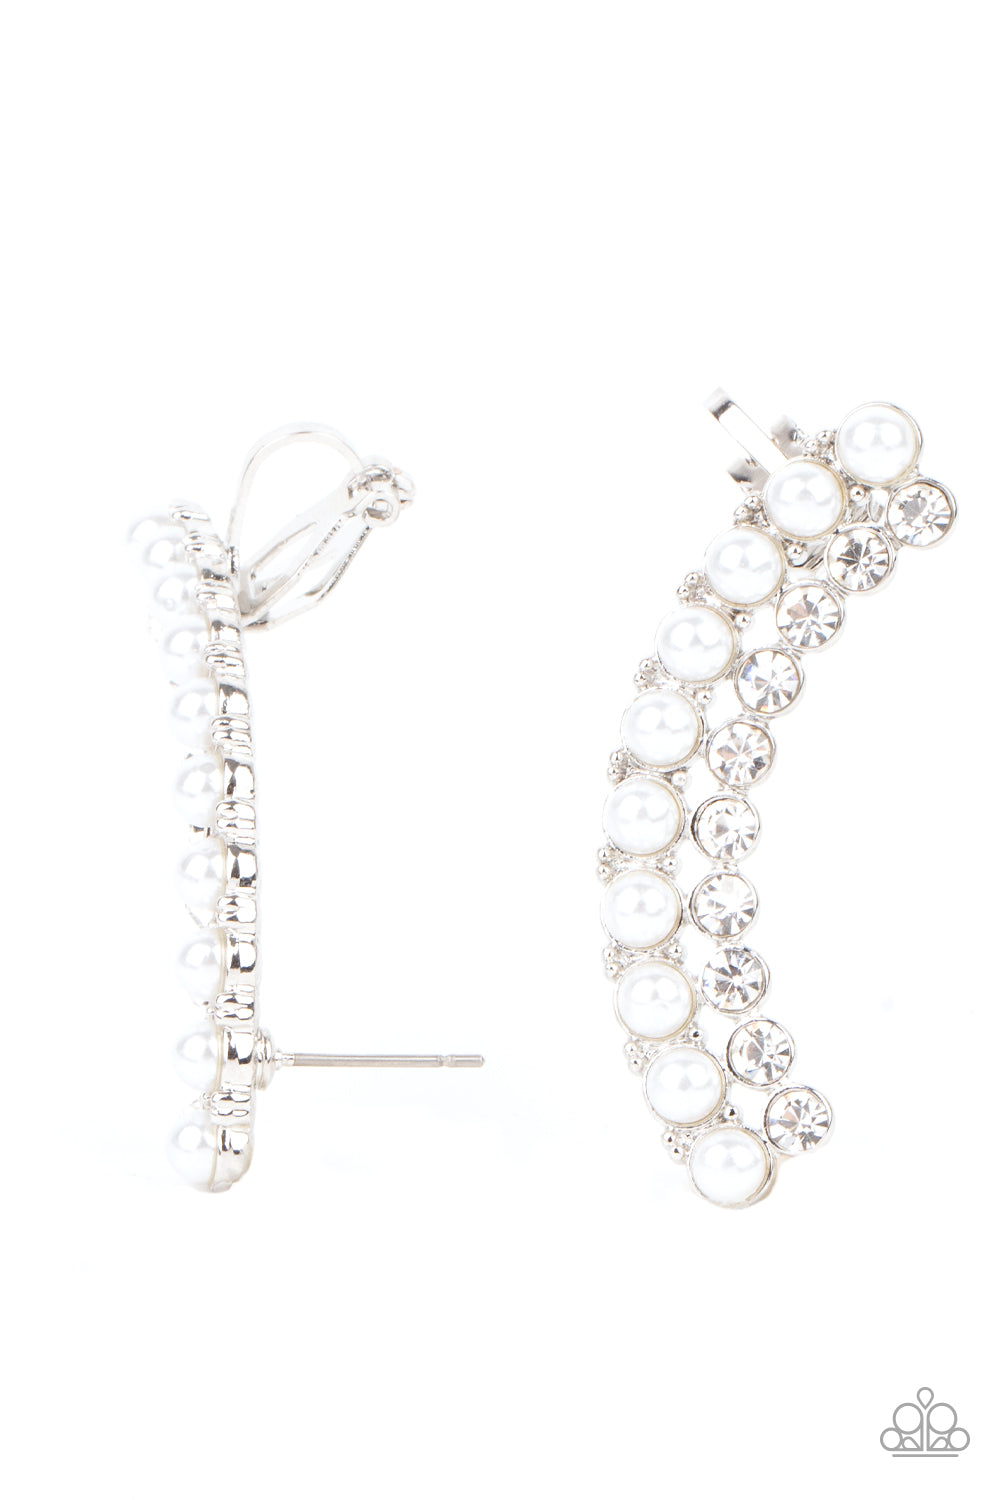 Doubled Down On Dazzle - White earrings